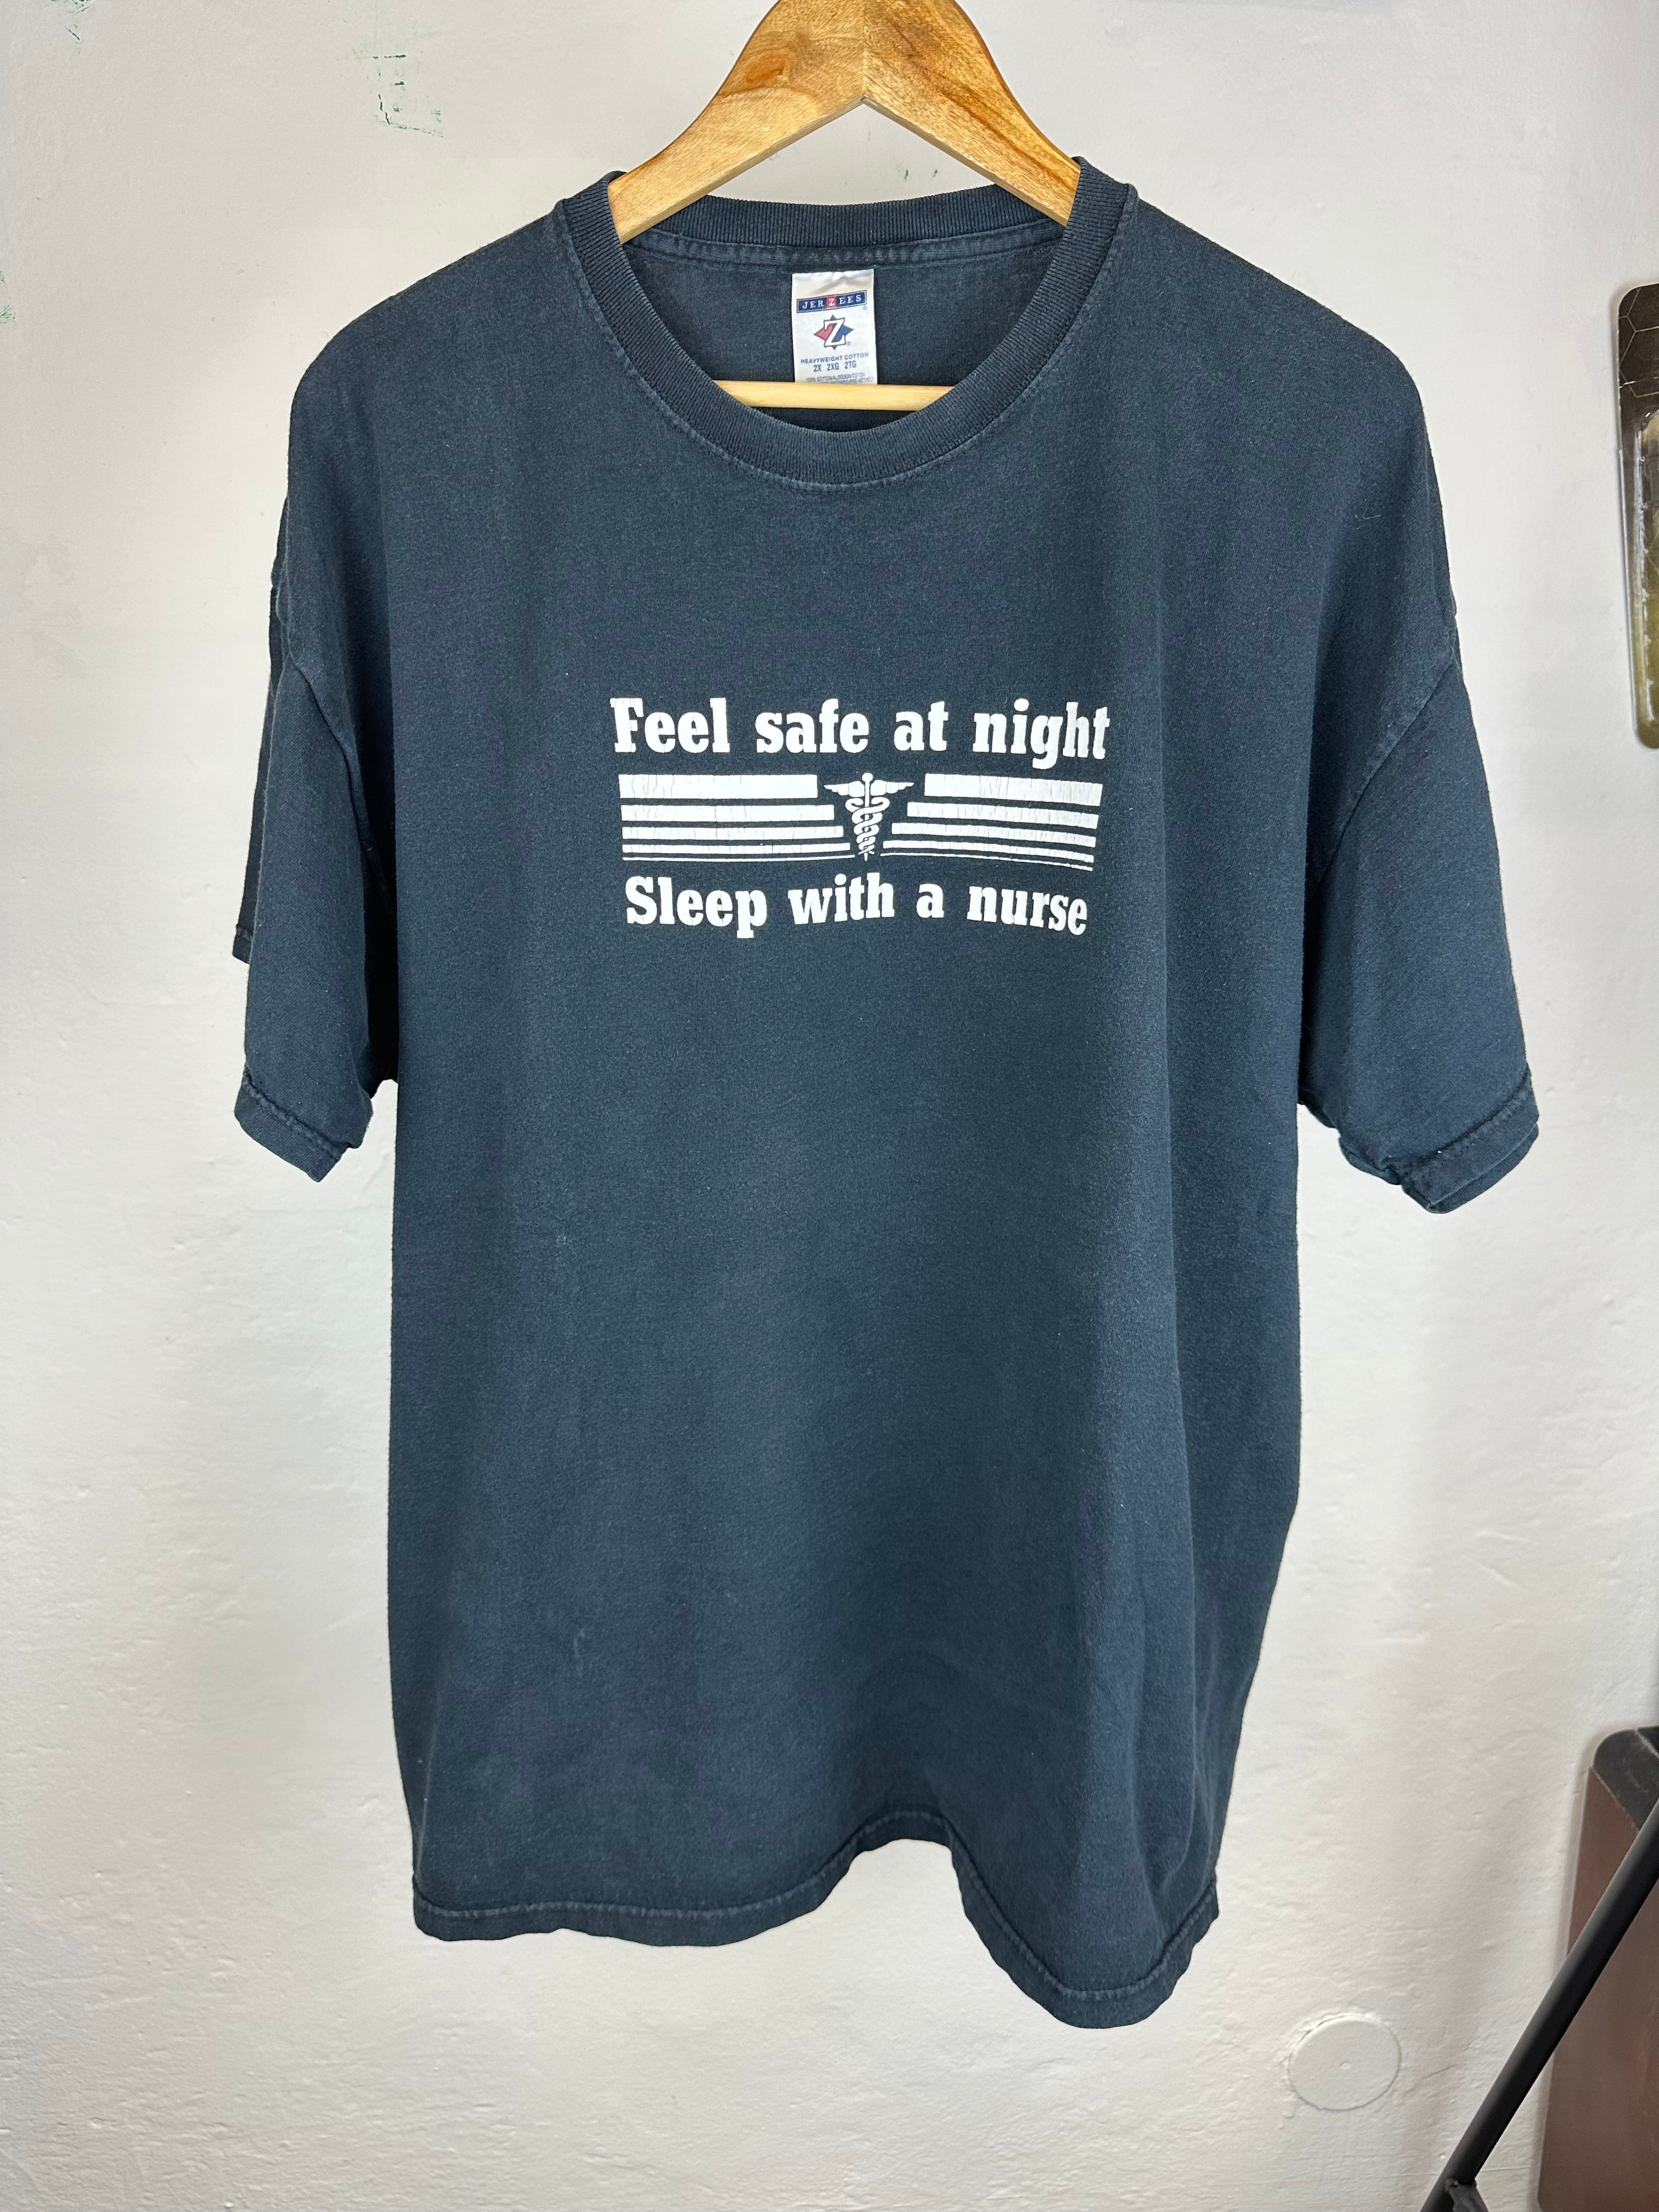 Vintage “Feel safe at night” t-shirt 90s - size XXL